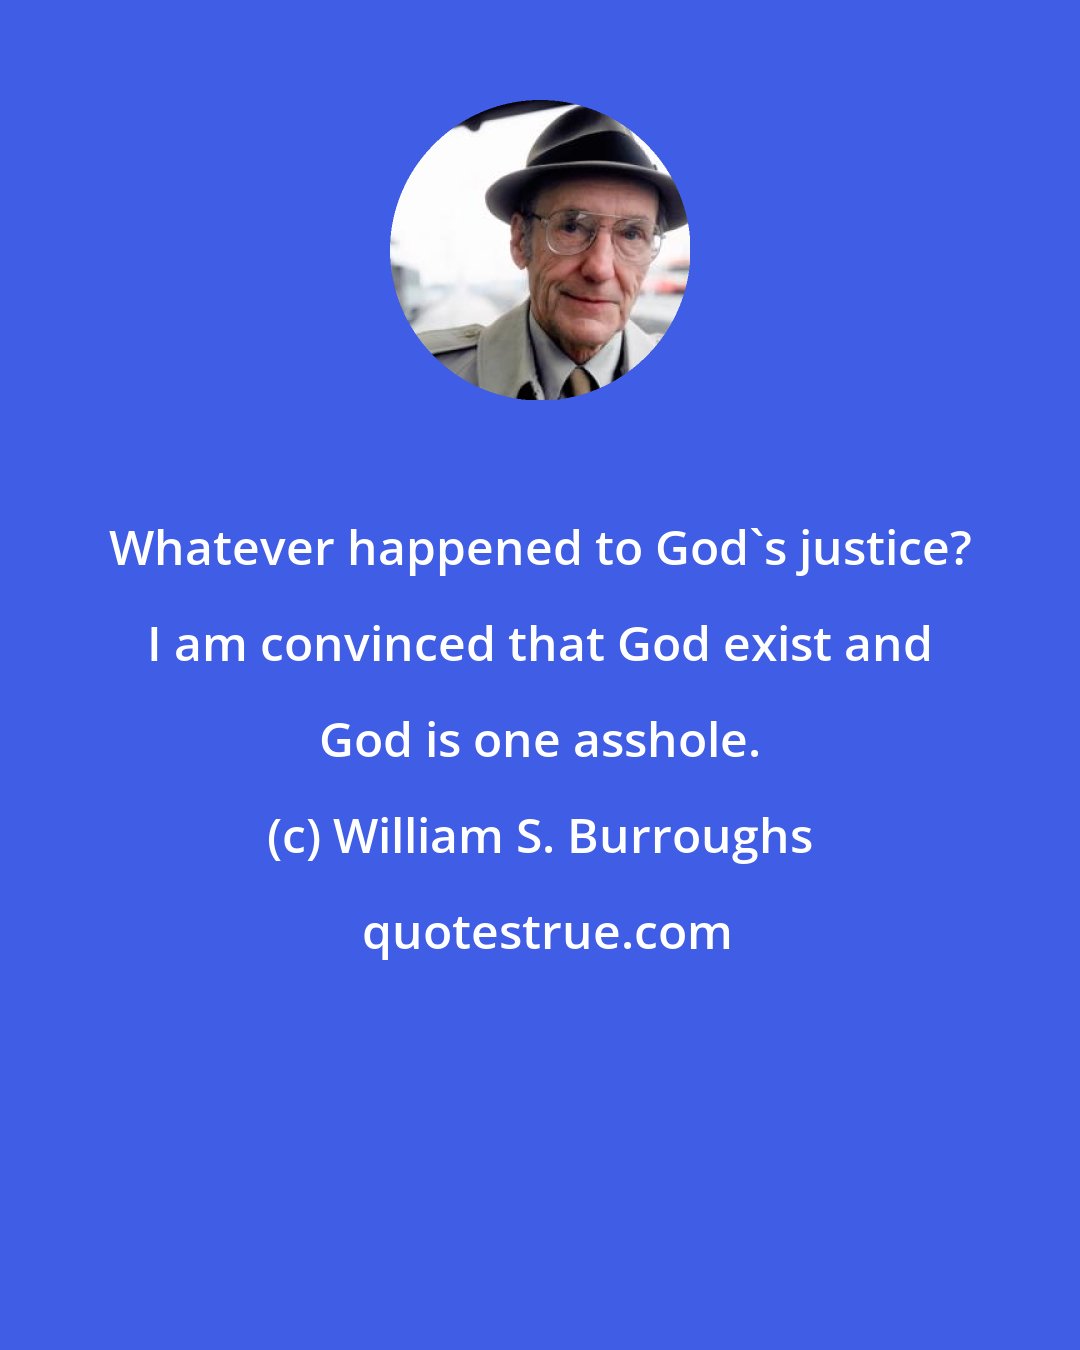 William S. Burroughs: Whatever happened to God's justice? I am convinced that God exist and God is one asshole.